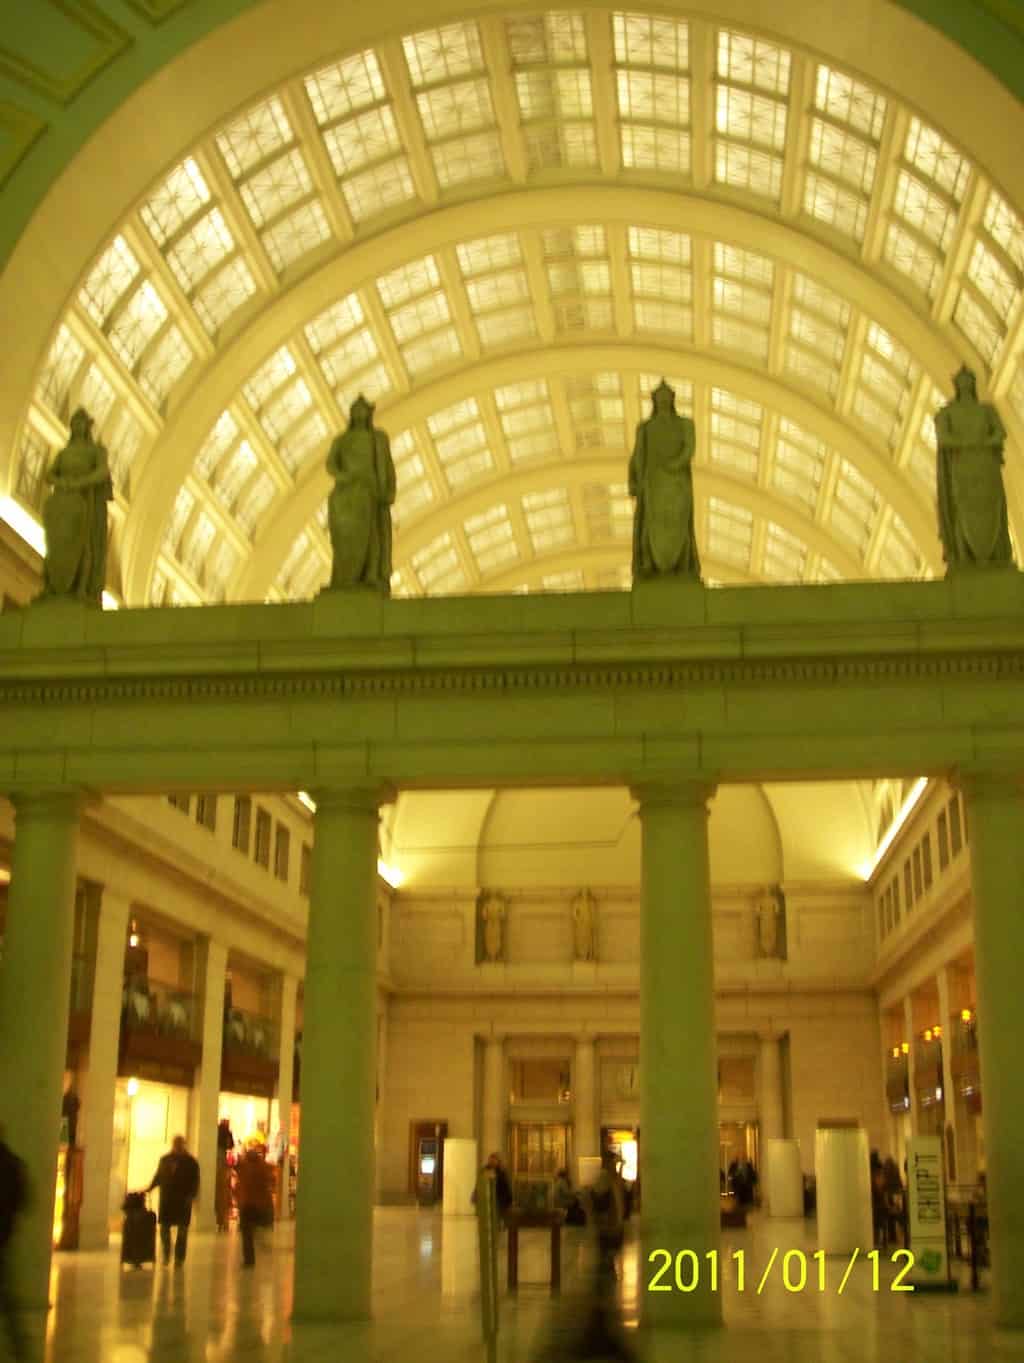 A bonus for visiting Washington, DC by bus is to being able to visit the Union Station and admire its spectacular architectural style